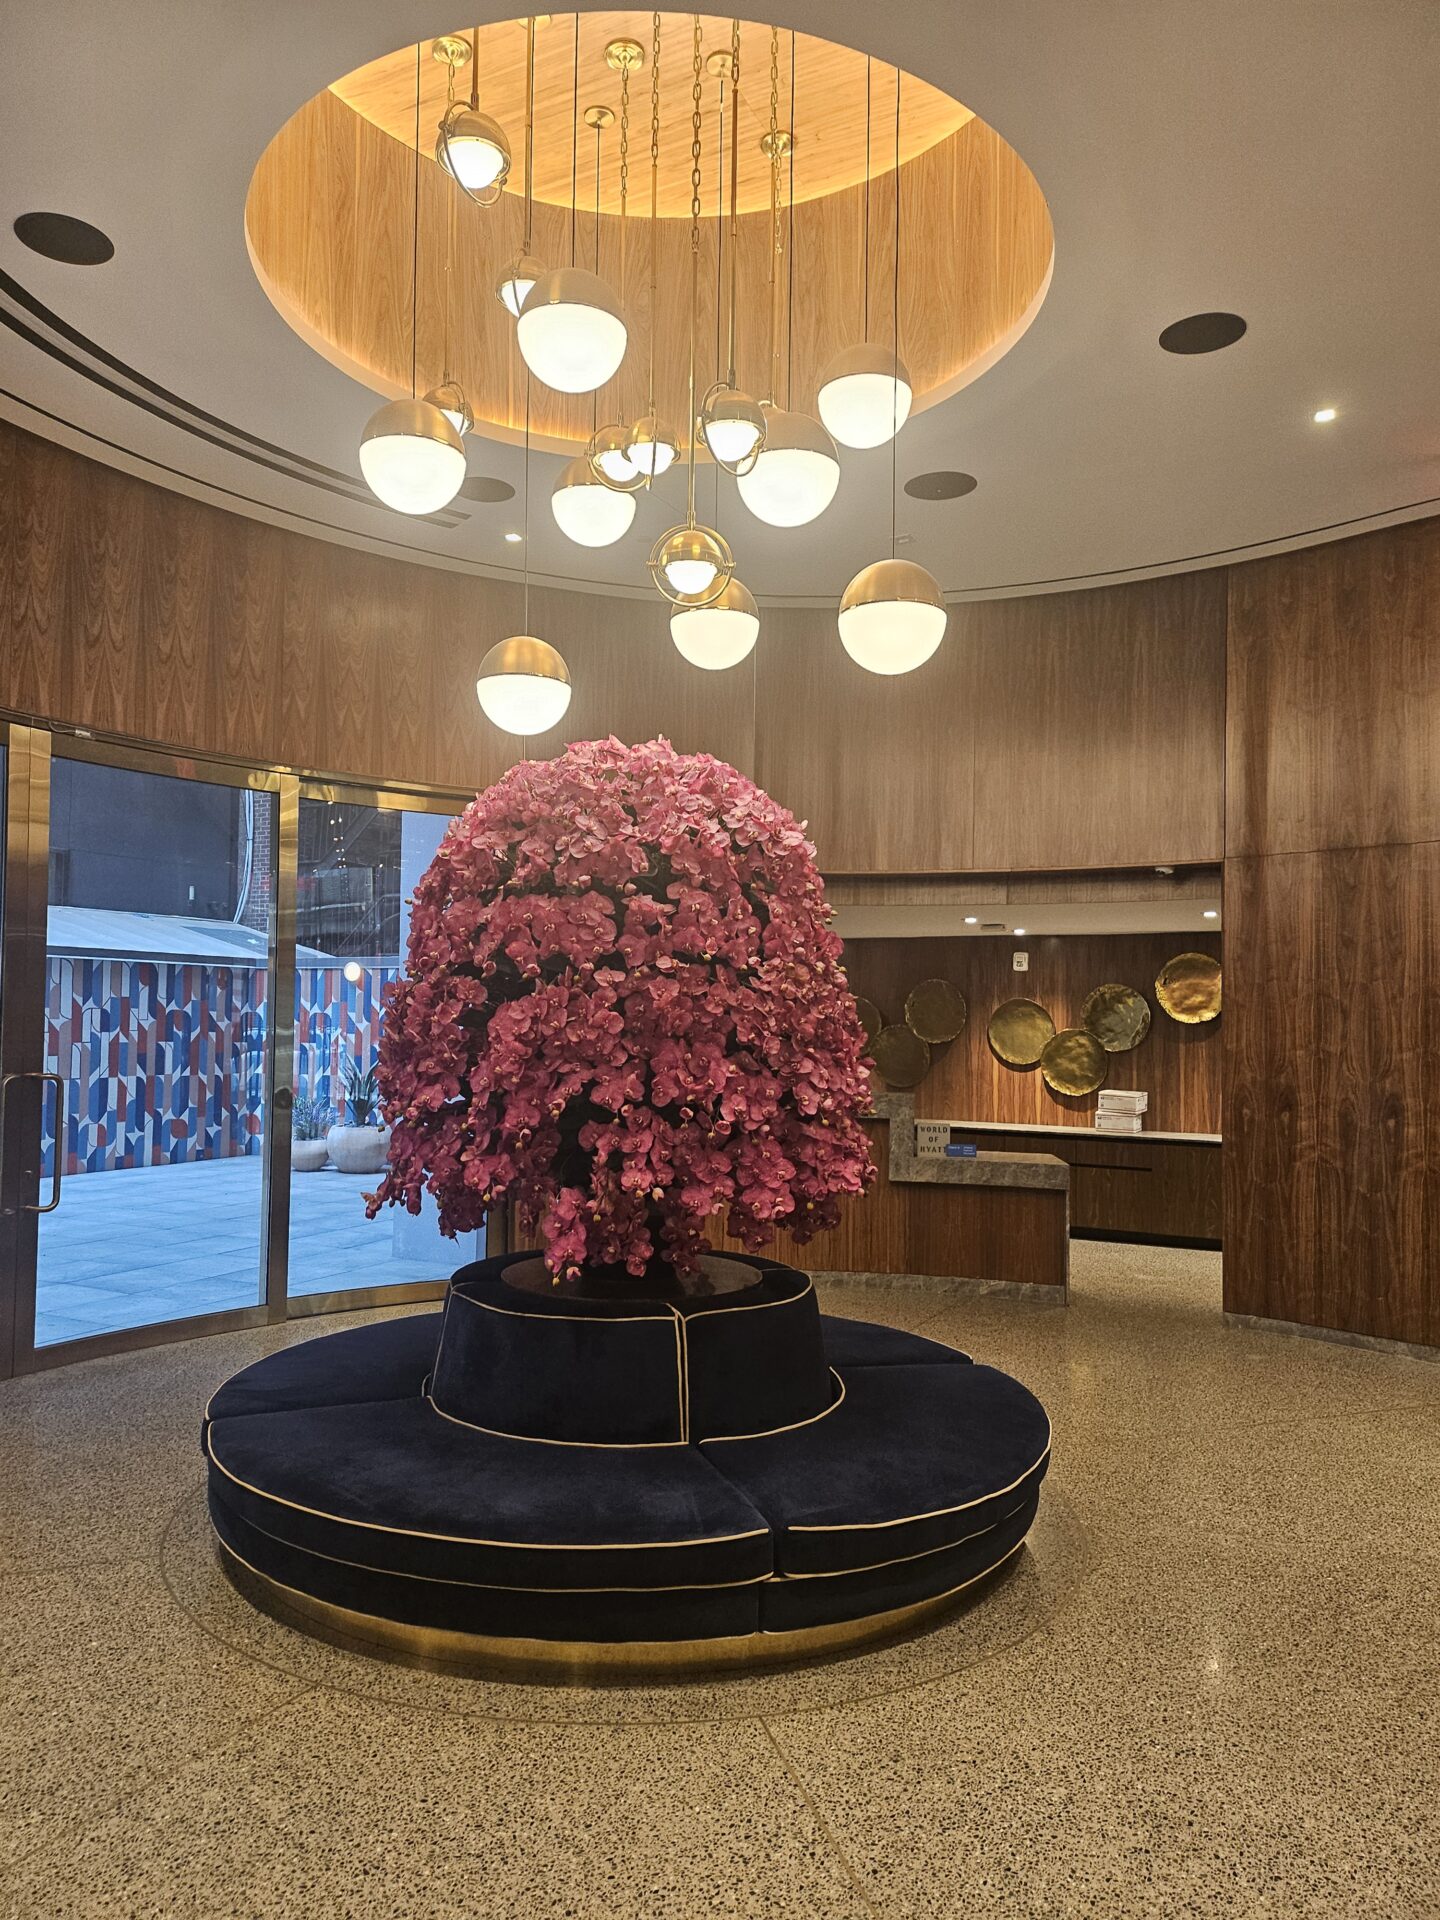 a tree with pink flowers in a lobby